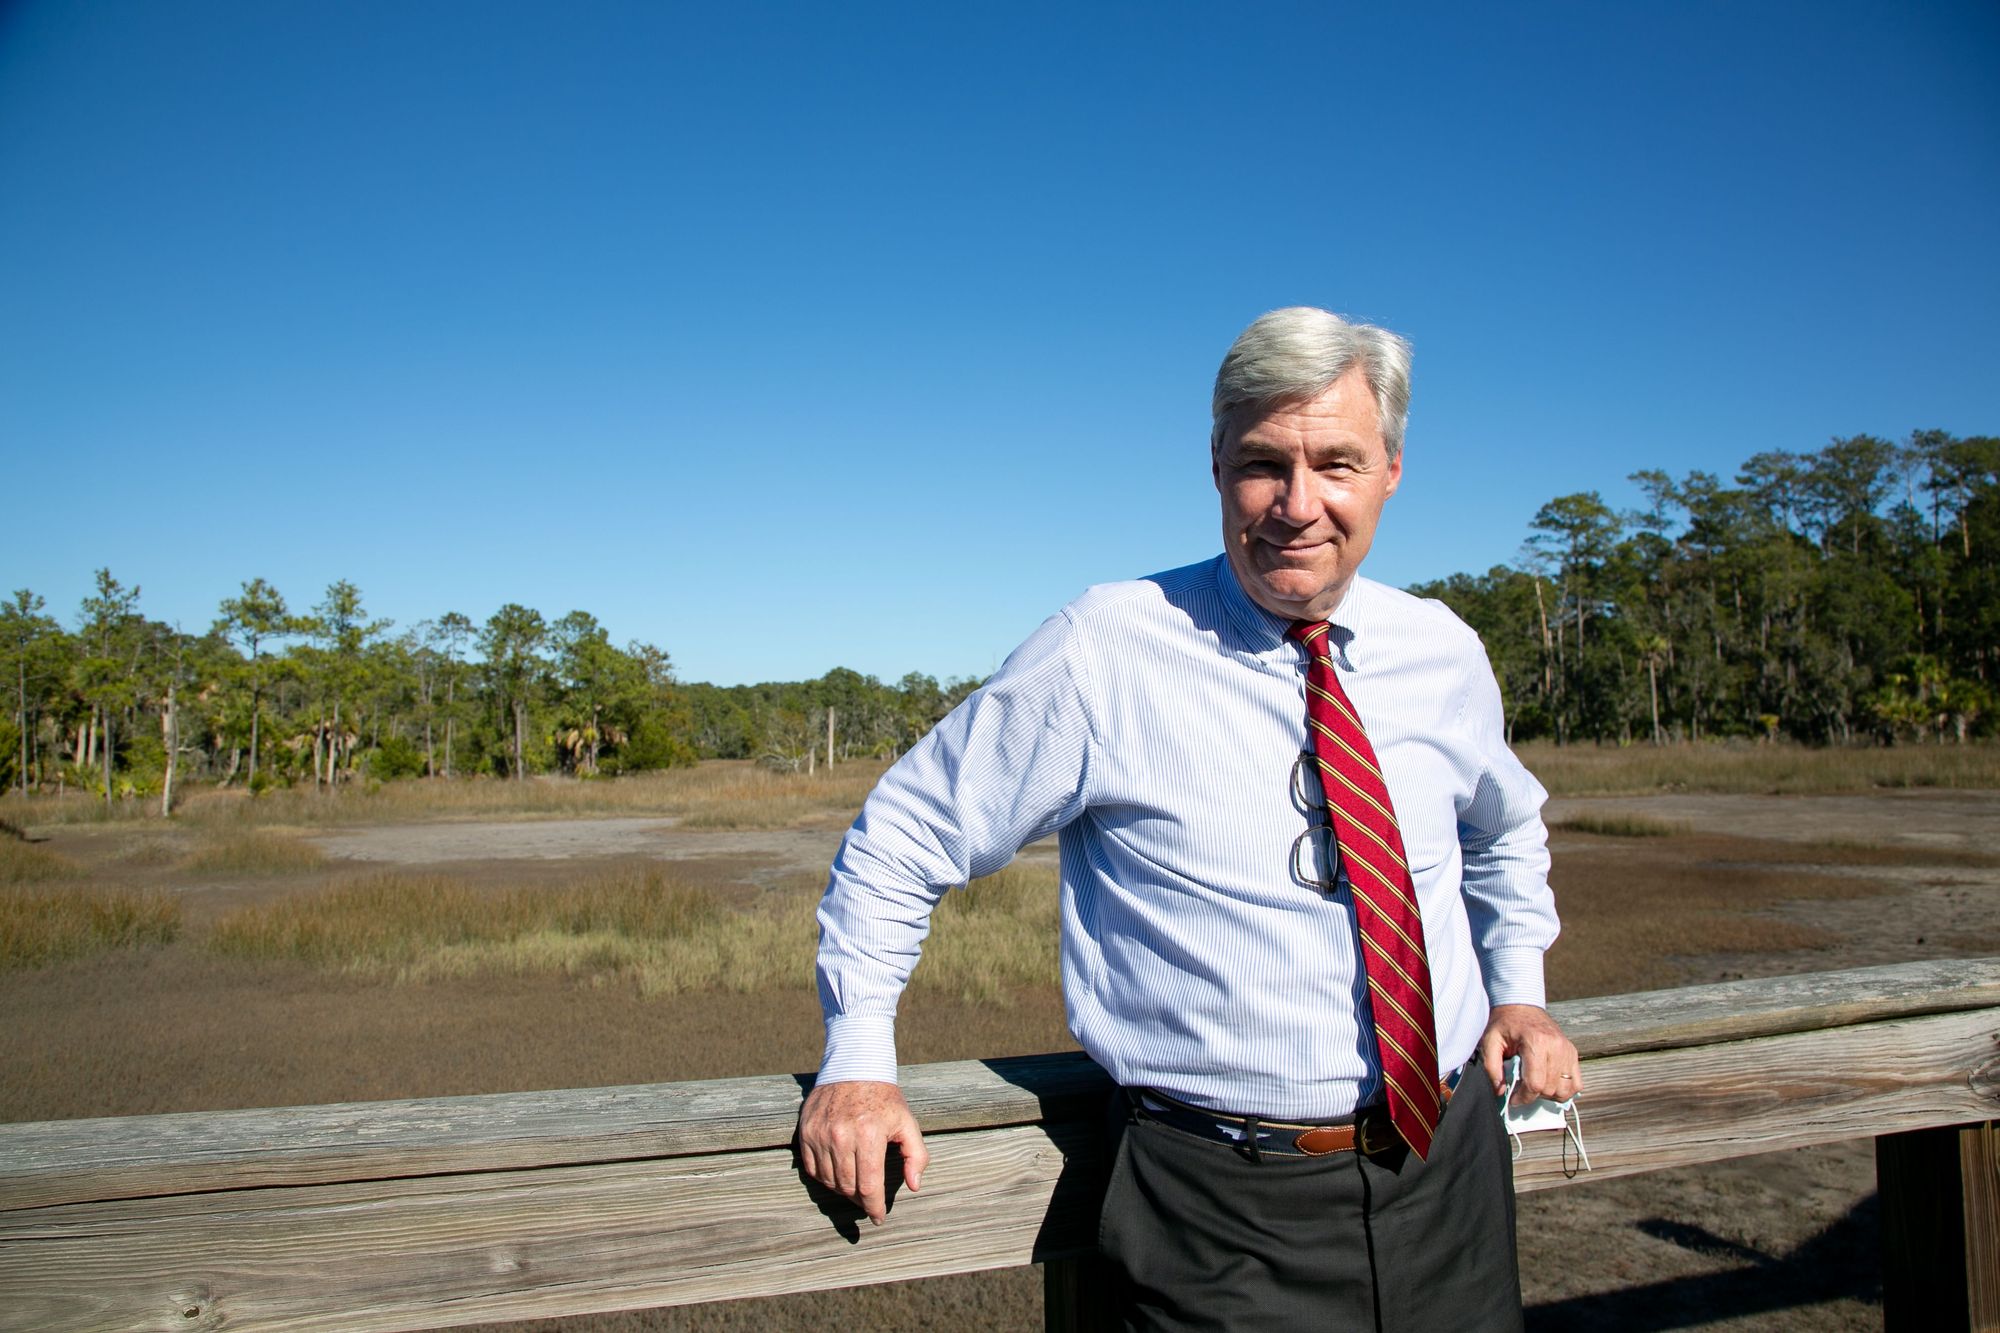 'People get it. The coast is in real trouble.' An interview with Sen. Sheldon Whitehouse